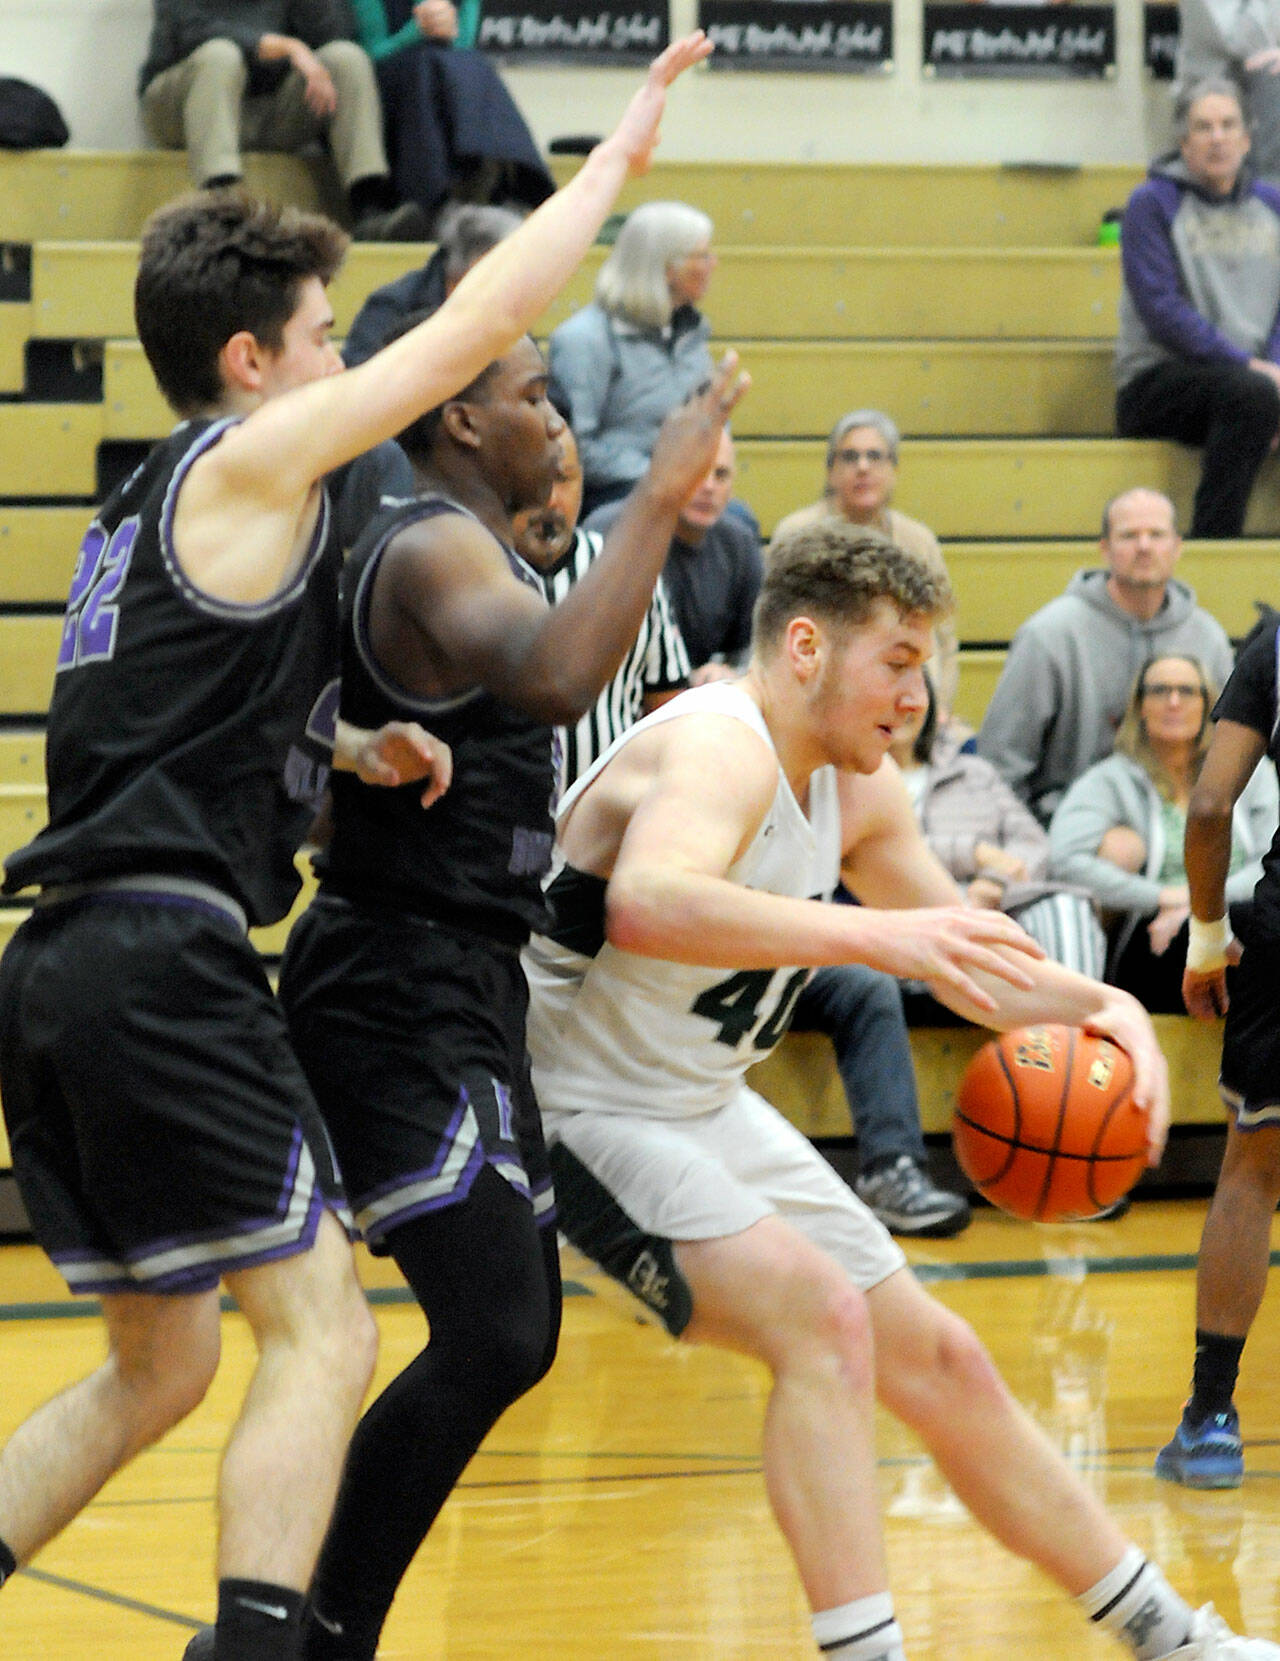 Port Angeles’ Isaiah Shamp, right, leans into the defense of Foster’s Liam Glanville, left, and Ronnie Toms on Saturday at Port Angeles High School. Shamp led the Riders with 28 points. (Keith Thorpe/Peninsula Daily News)